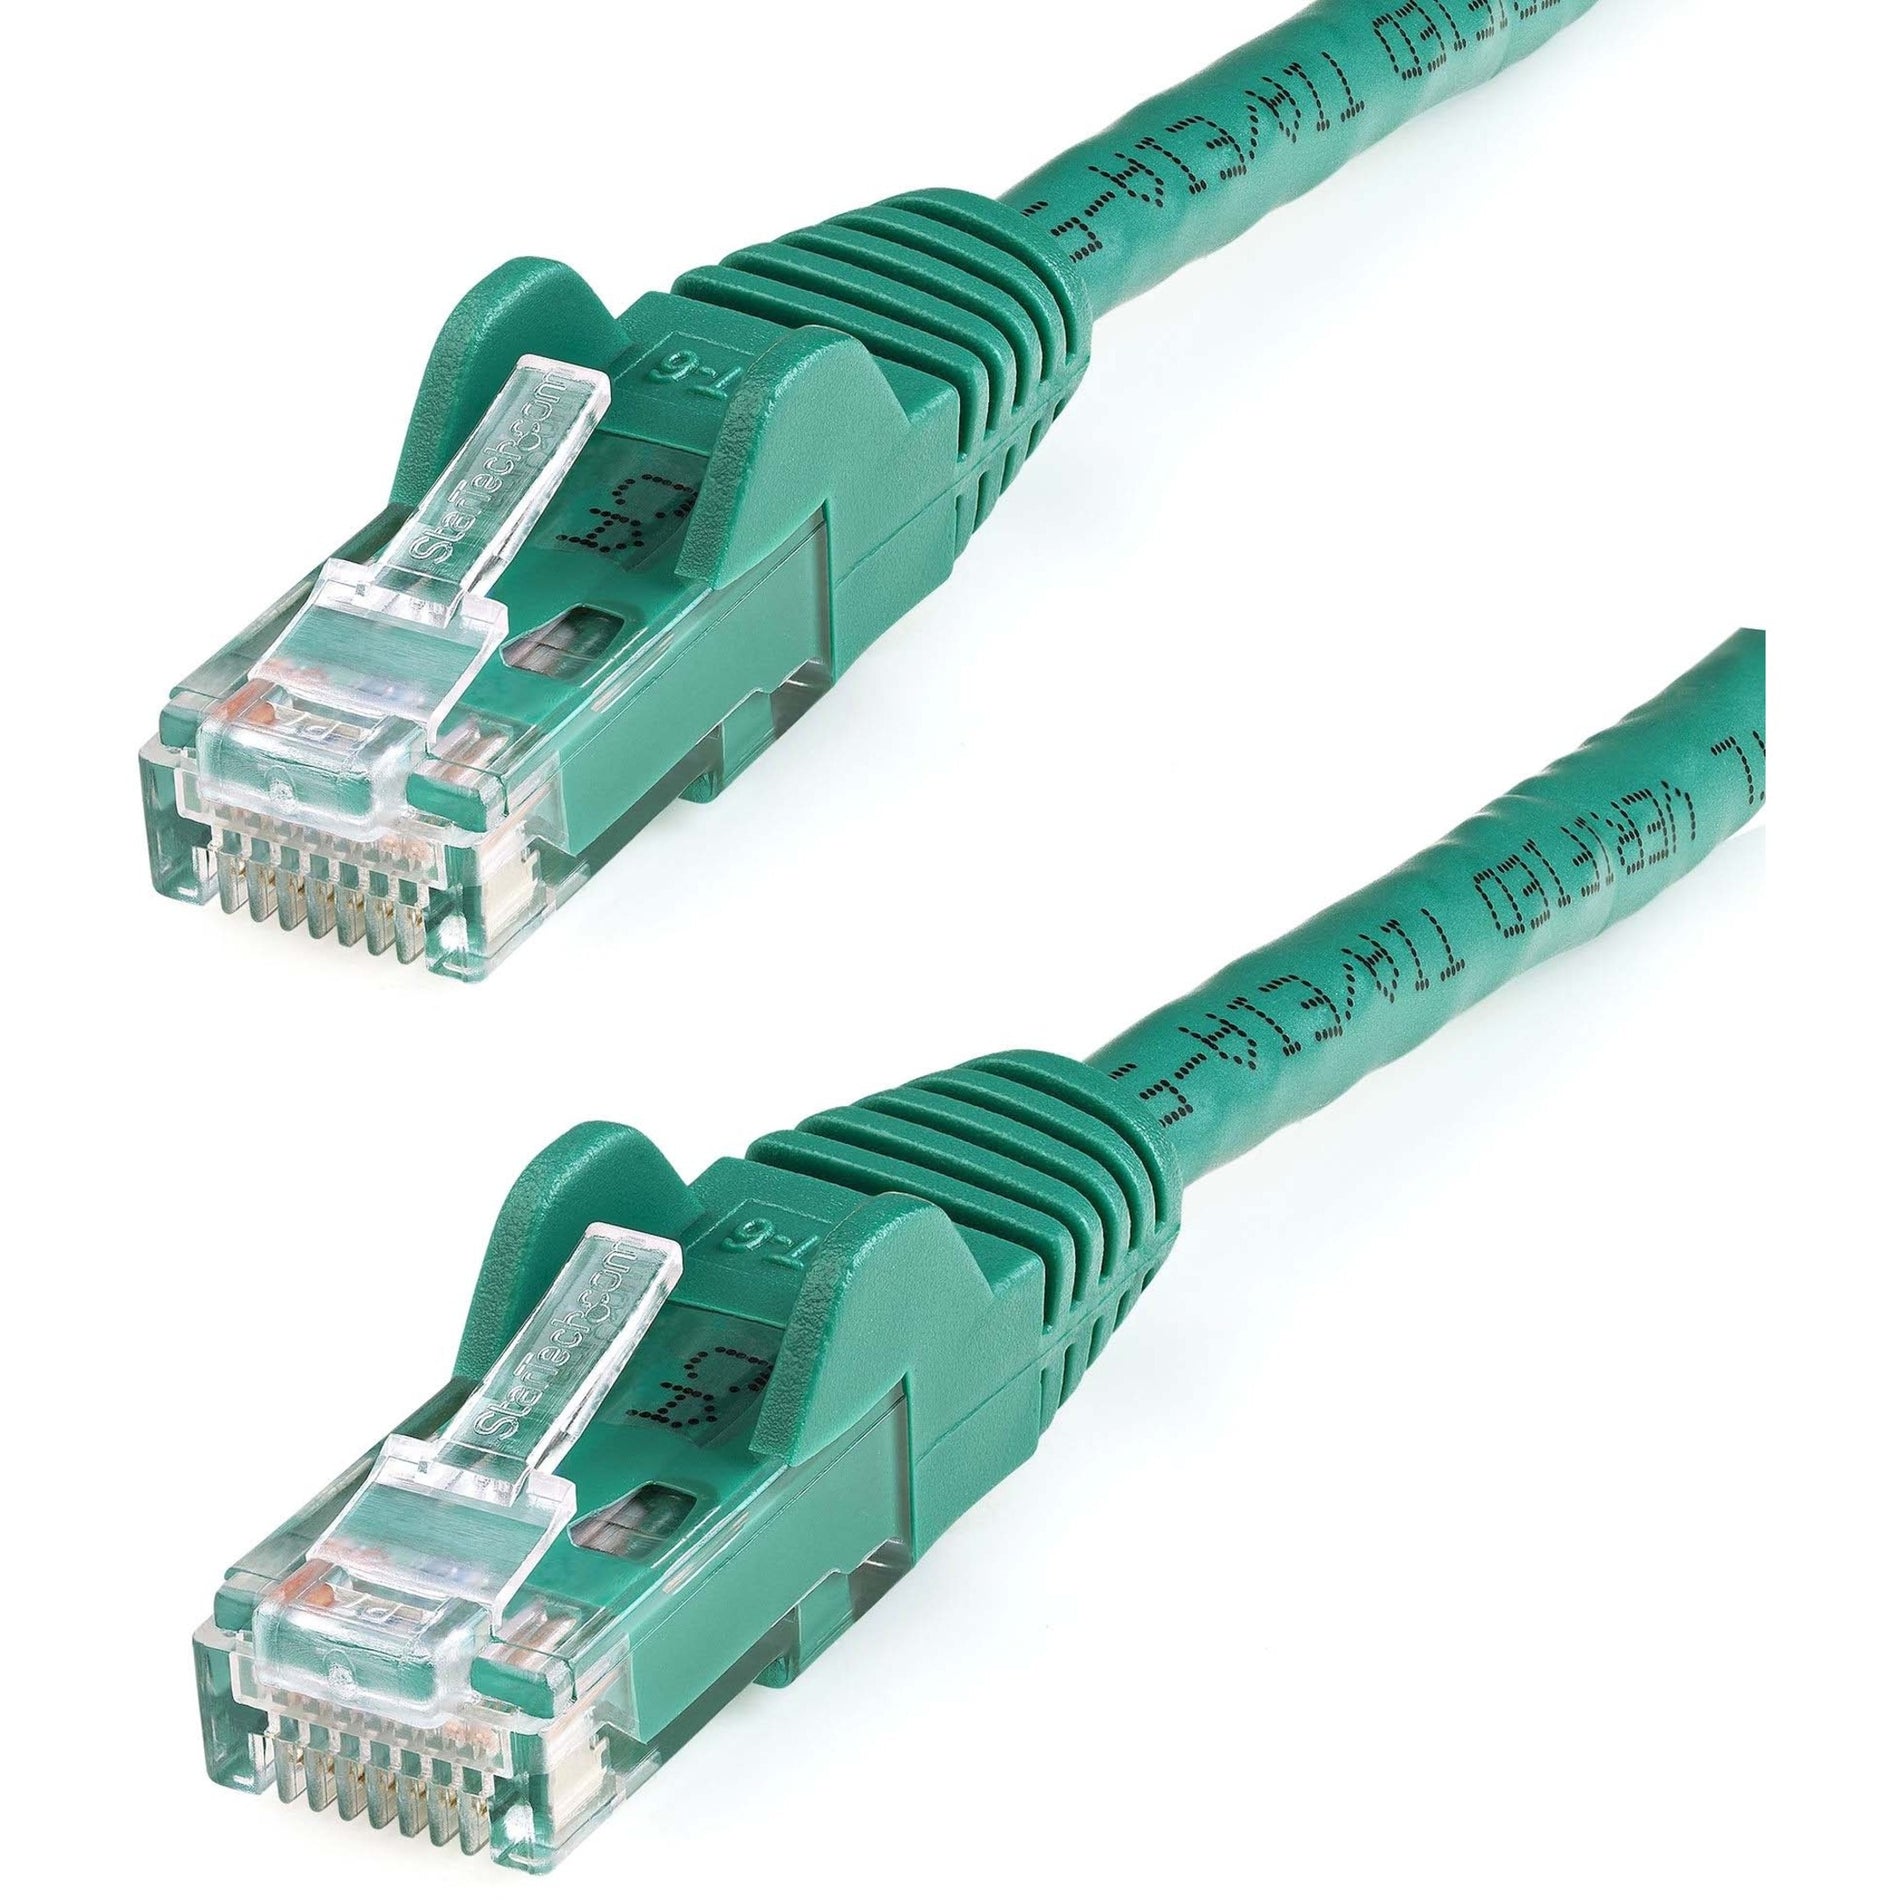 StarTech.com N6PATCH4GN Cat6 Patch Cable, 4ft Green Ethernet Cable, Snagless RJ45 Connectors